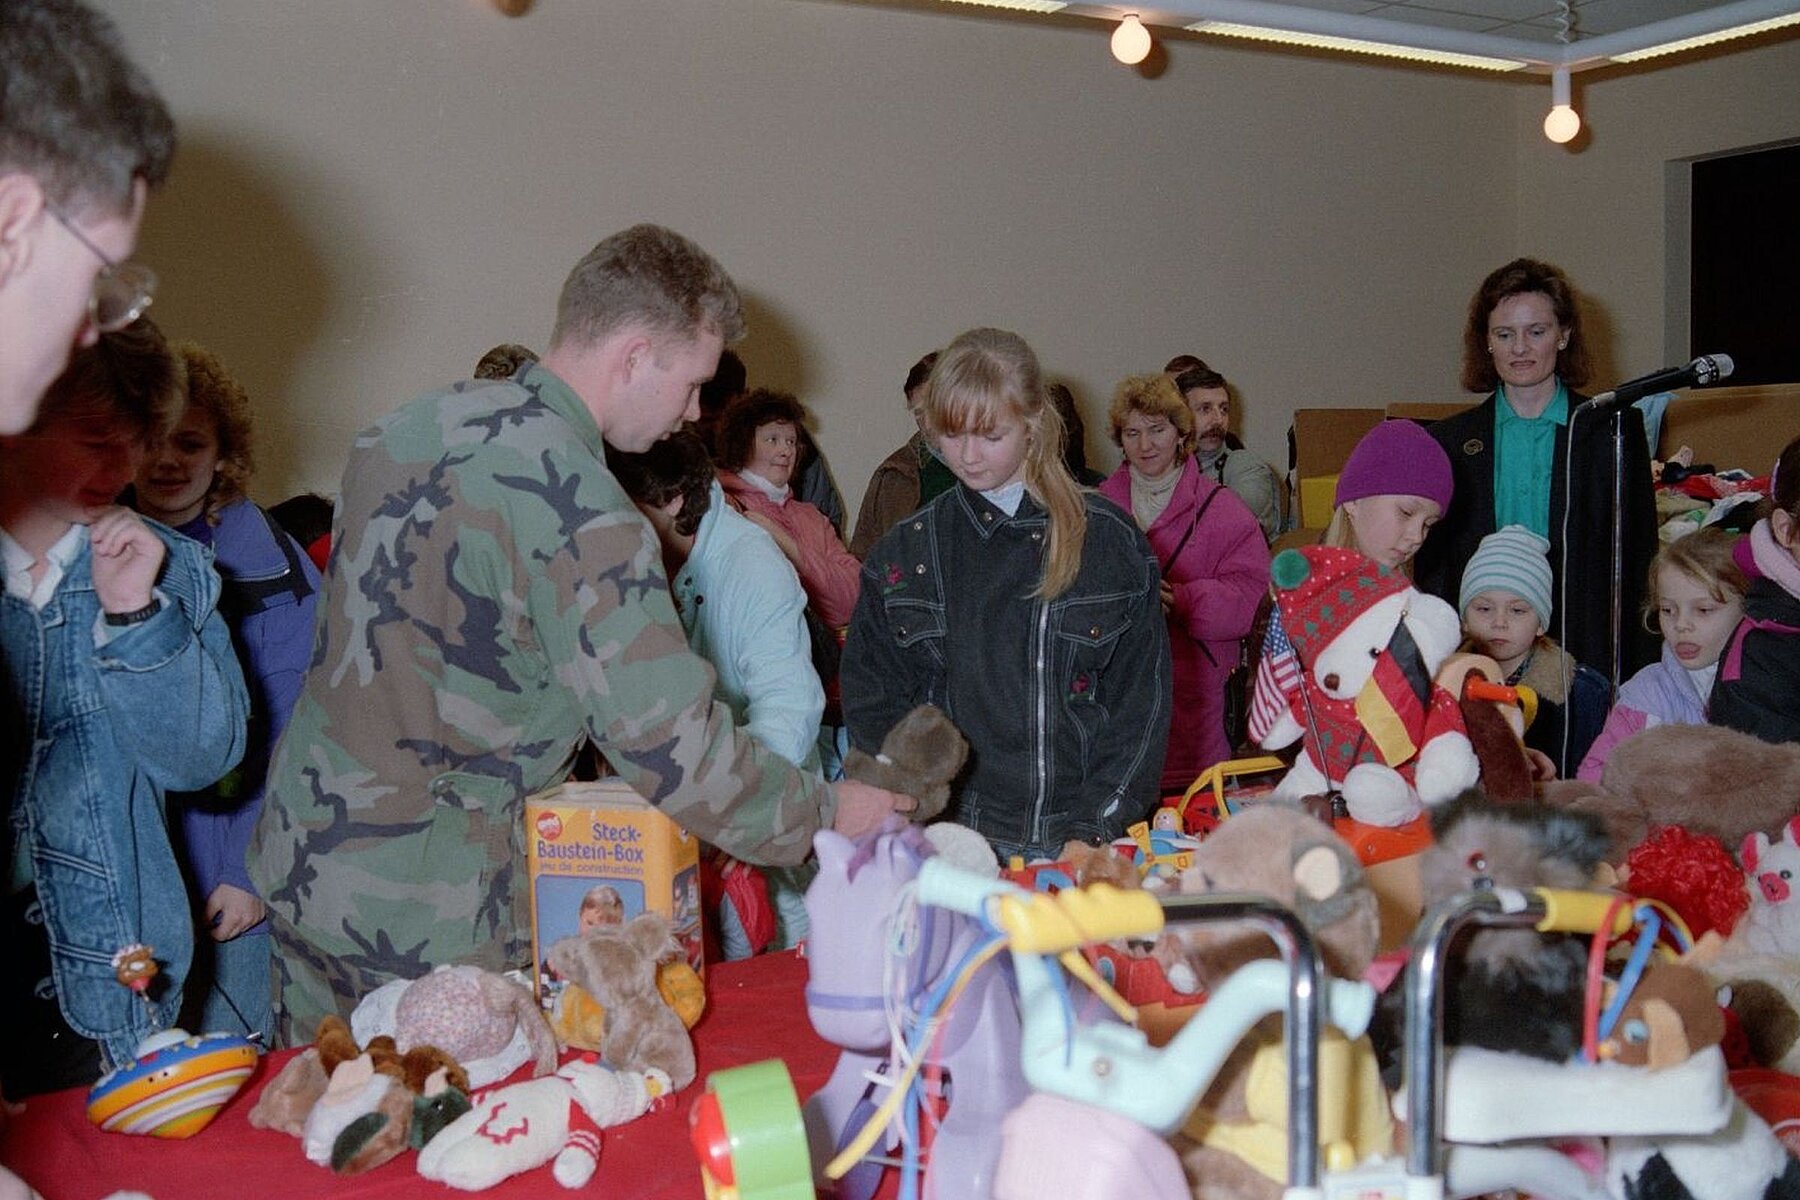 An American soldier surrounded by refugees from the GDR. In the foreground is a table with various toys. 